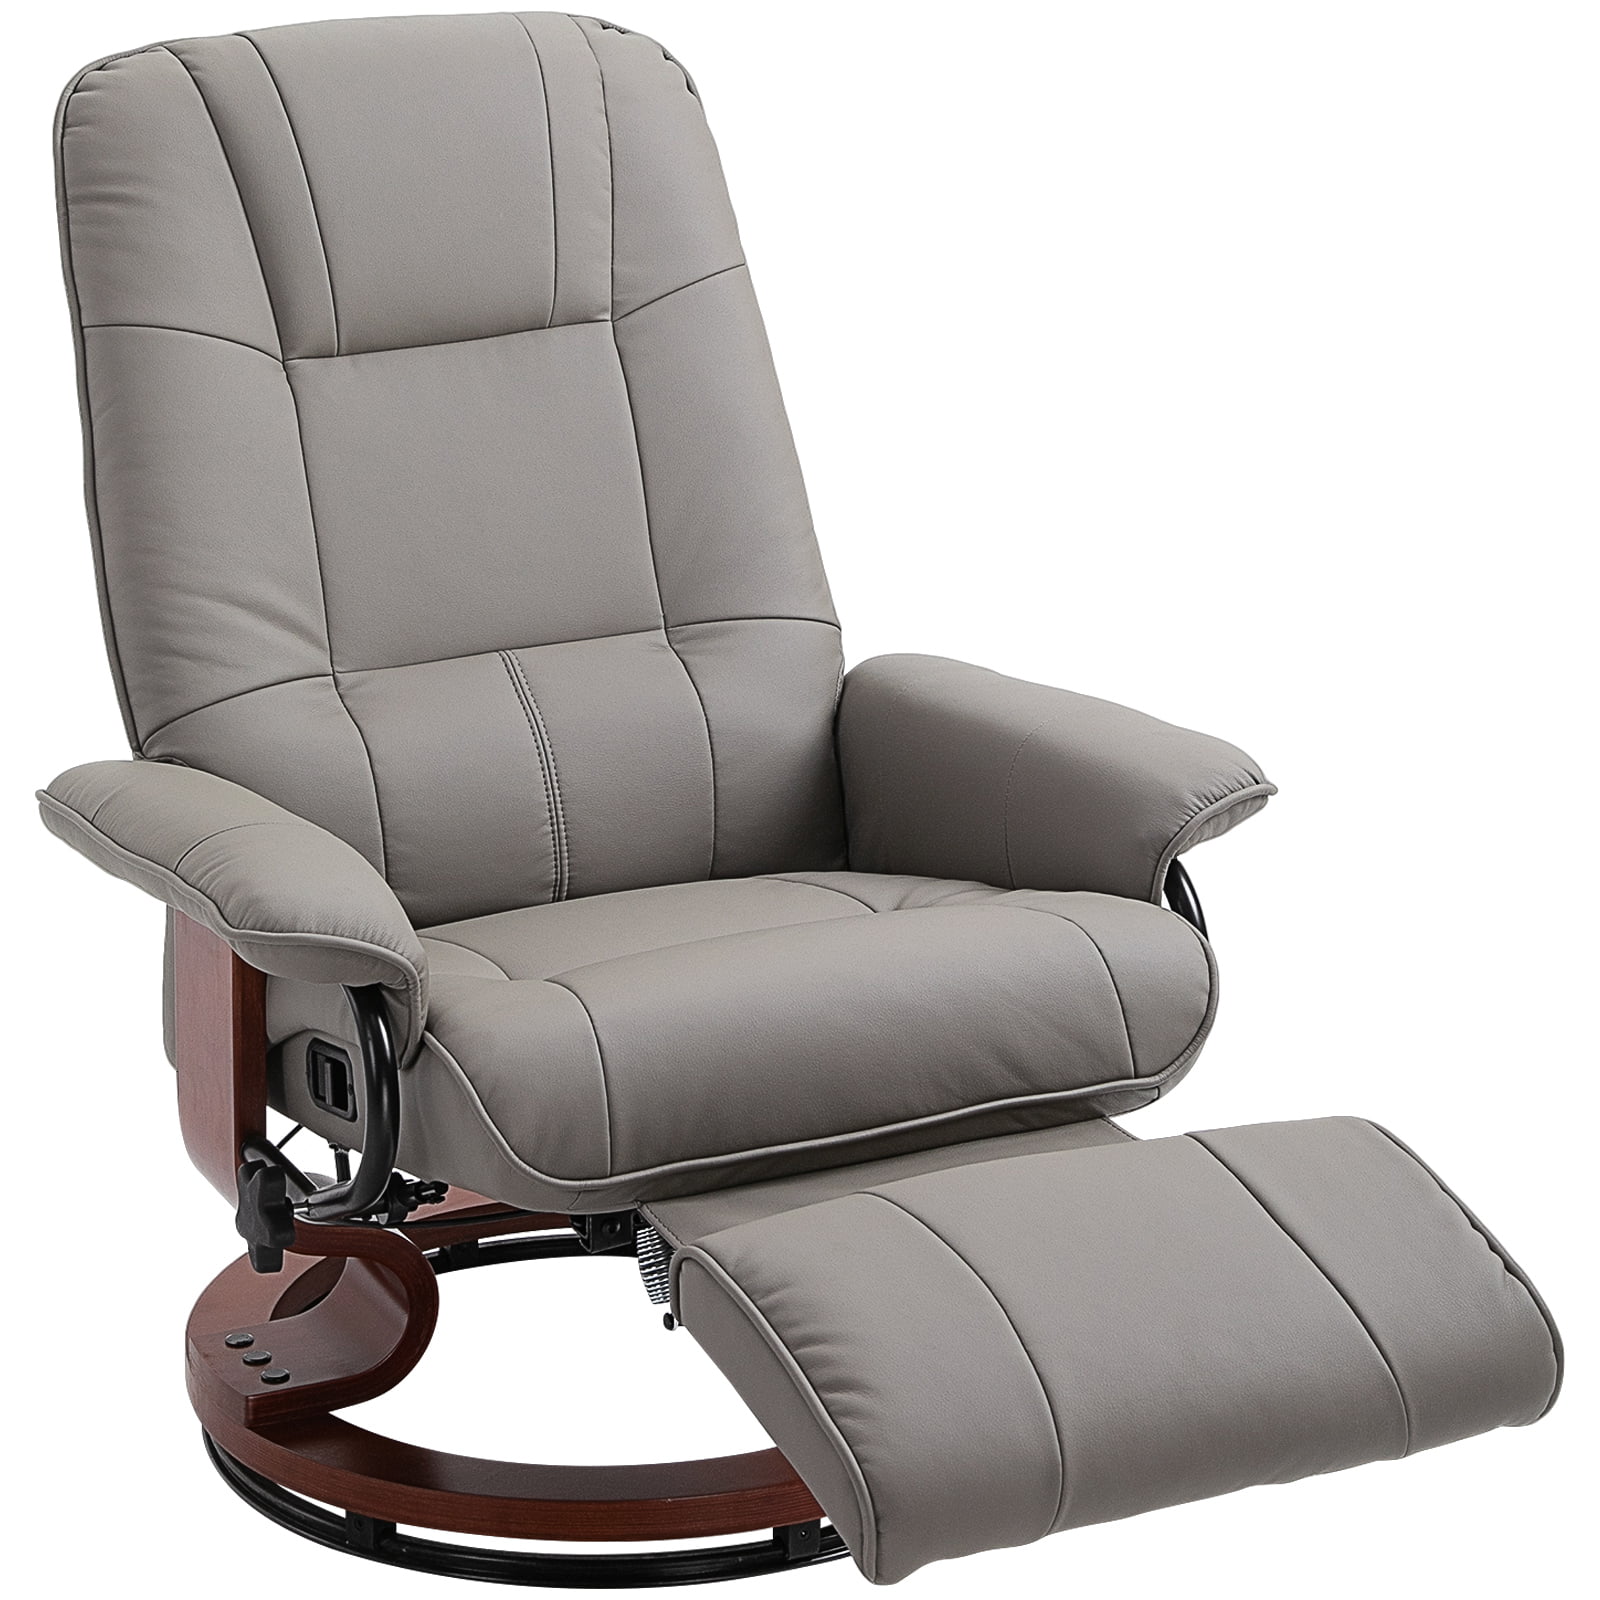 Homcom Faux Leather Adjustable Manual, Leather Recliner Swivel Chair